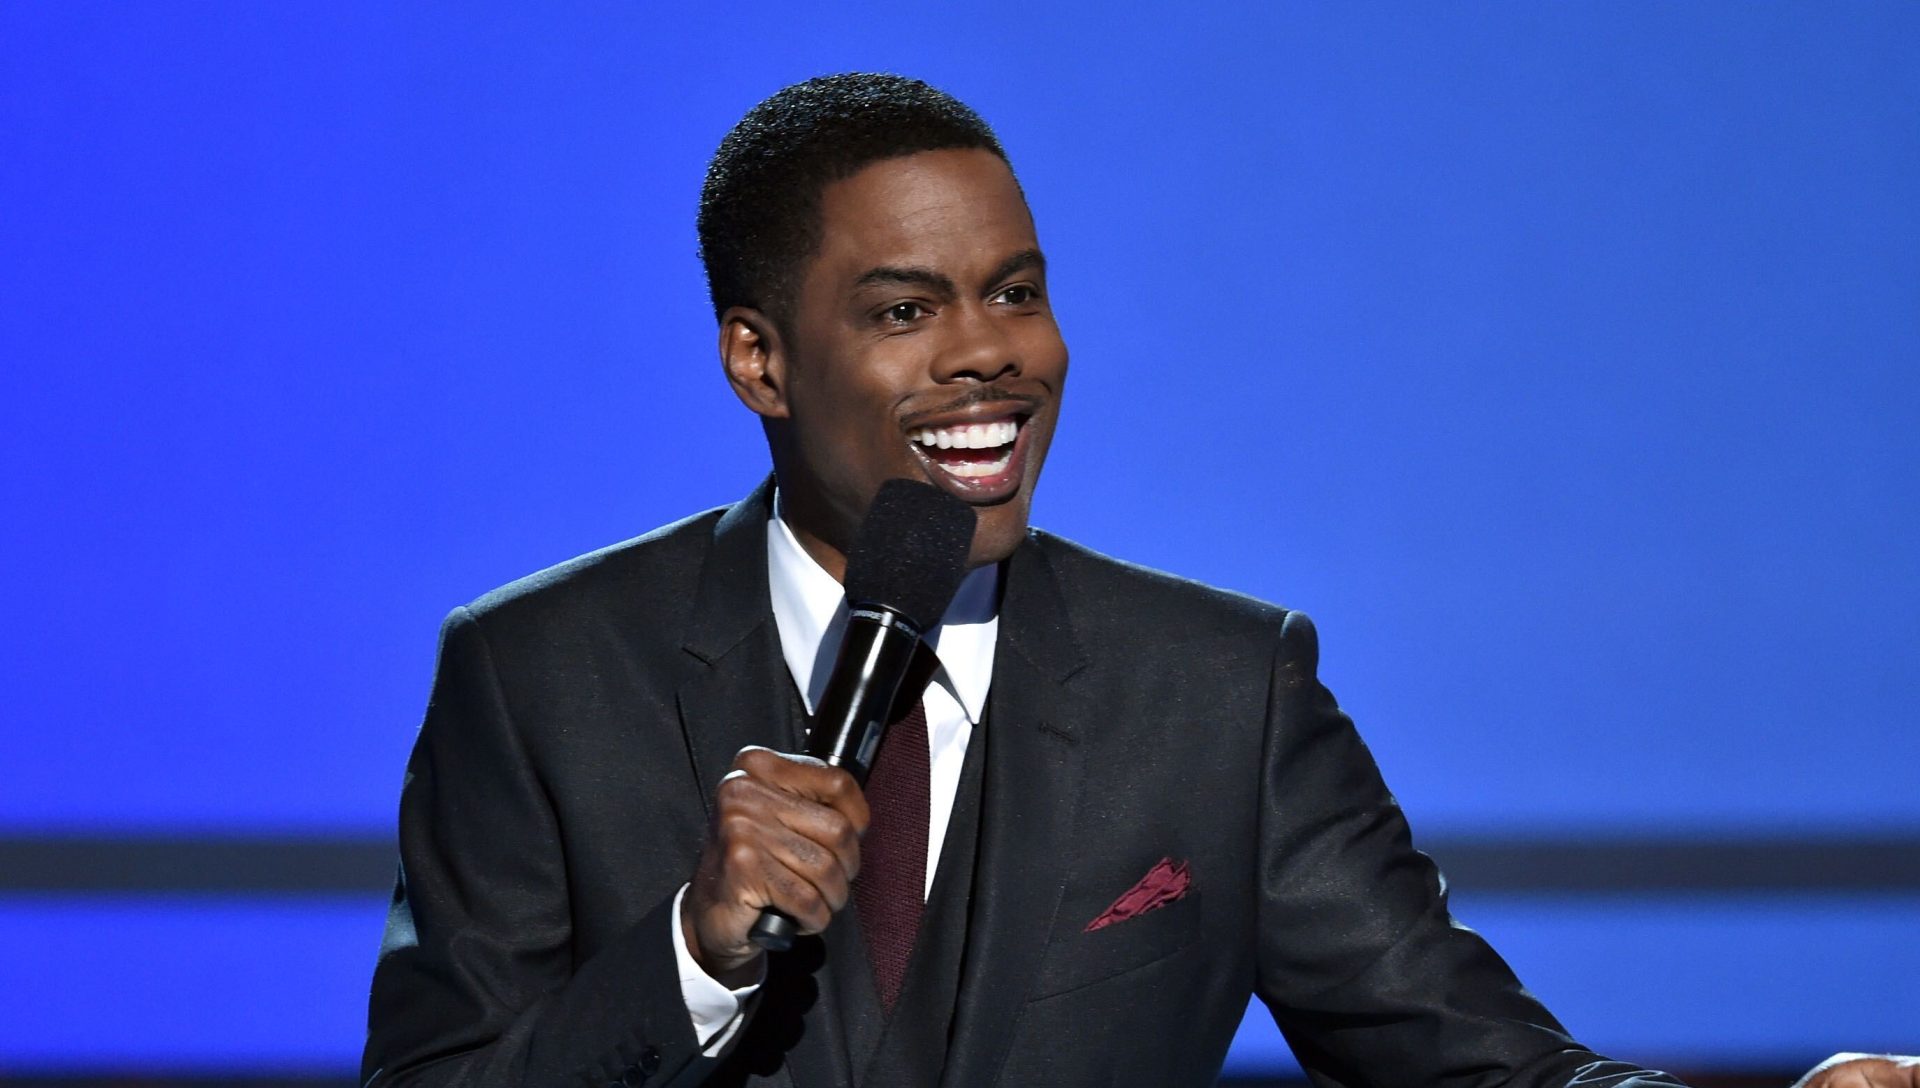 Chris Rock Mocks Will & Jada’s ‘Entanglement,’ Labels Meghan Markle’s Response To Alleged Royal Family Racism As ‘Acting Dumb’ In Netflix Special